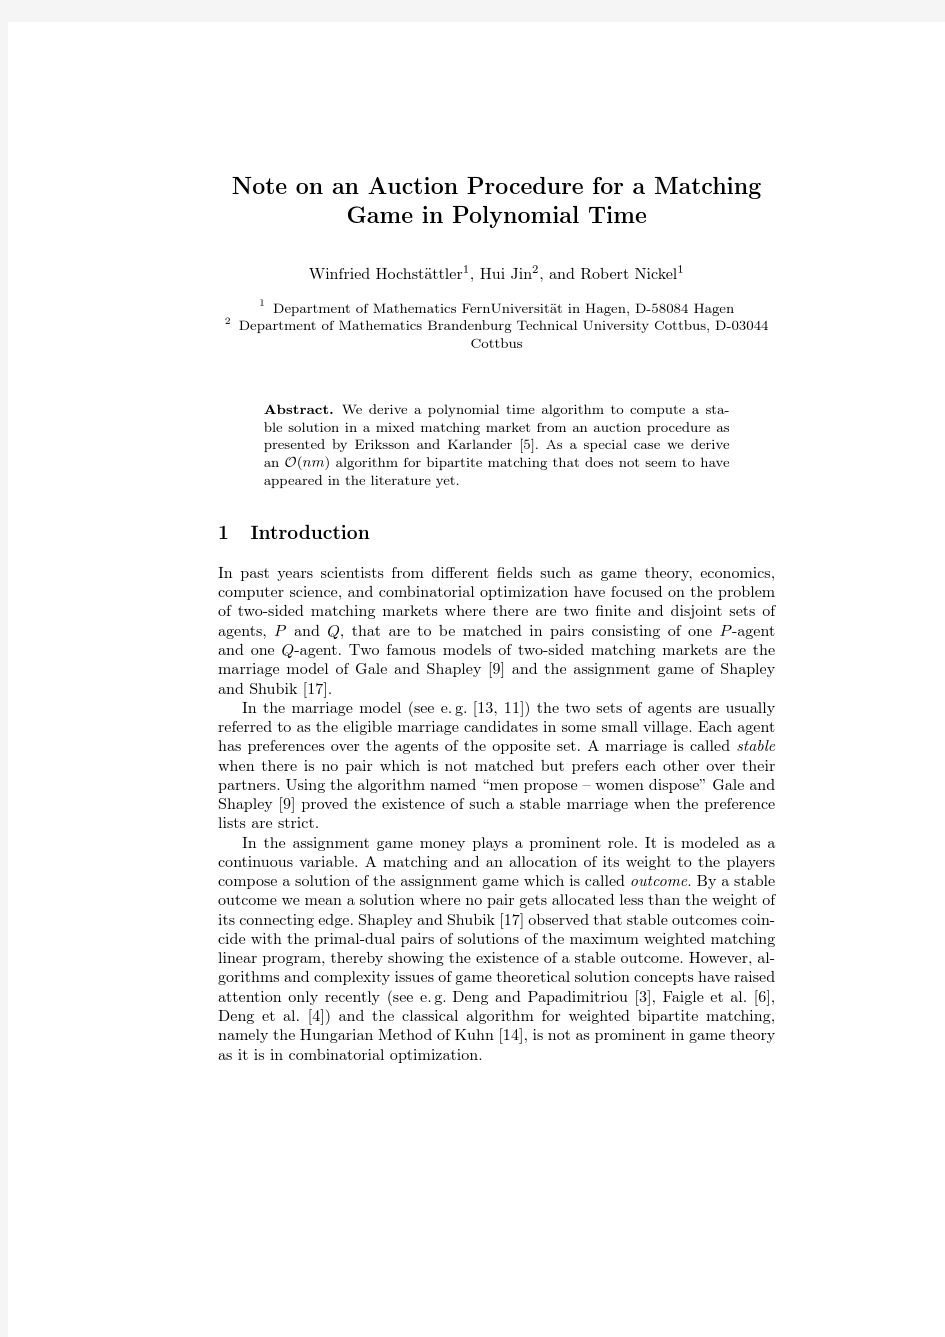 Note on an auction procedure for matching games in polynomial time